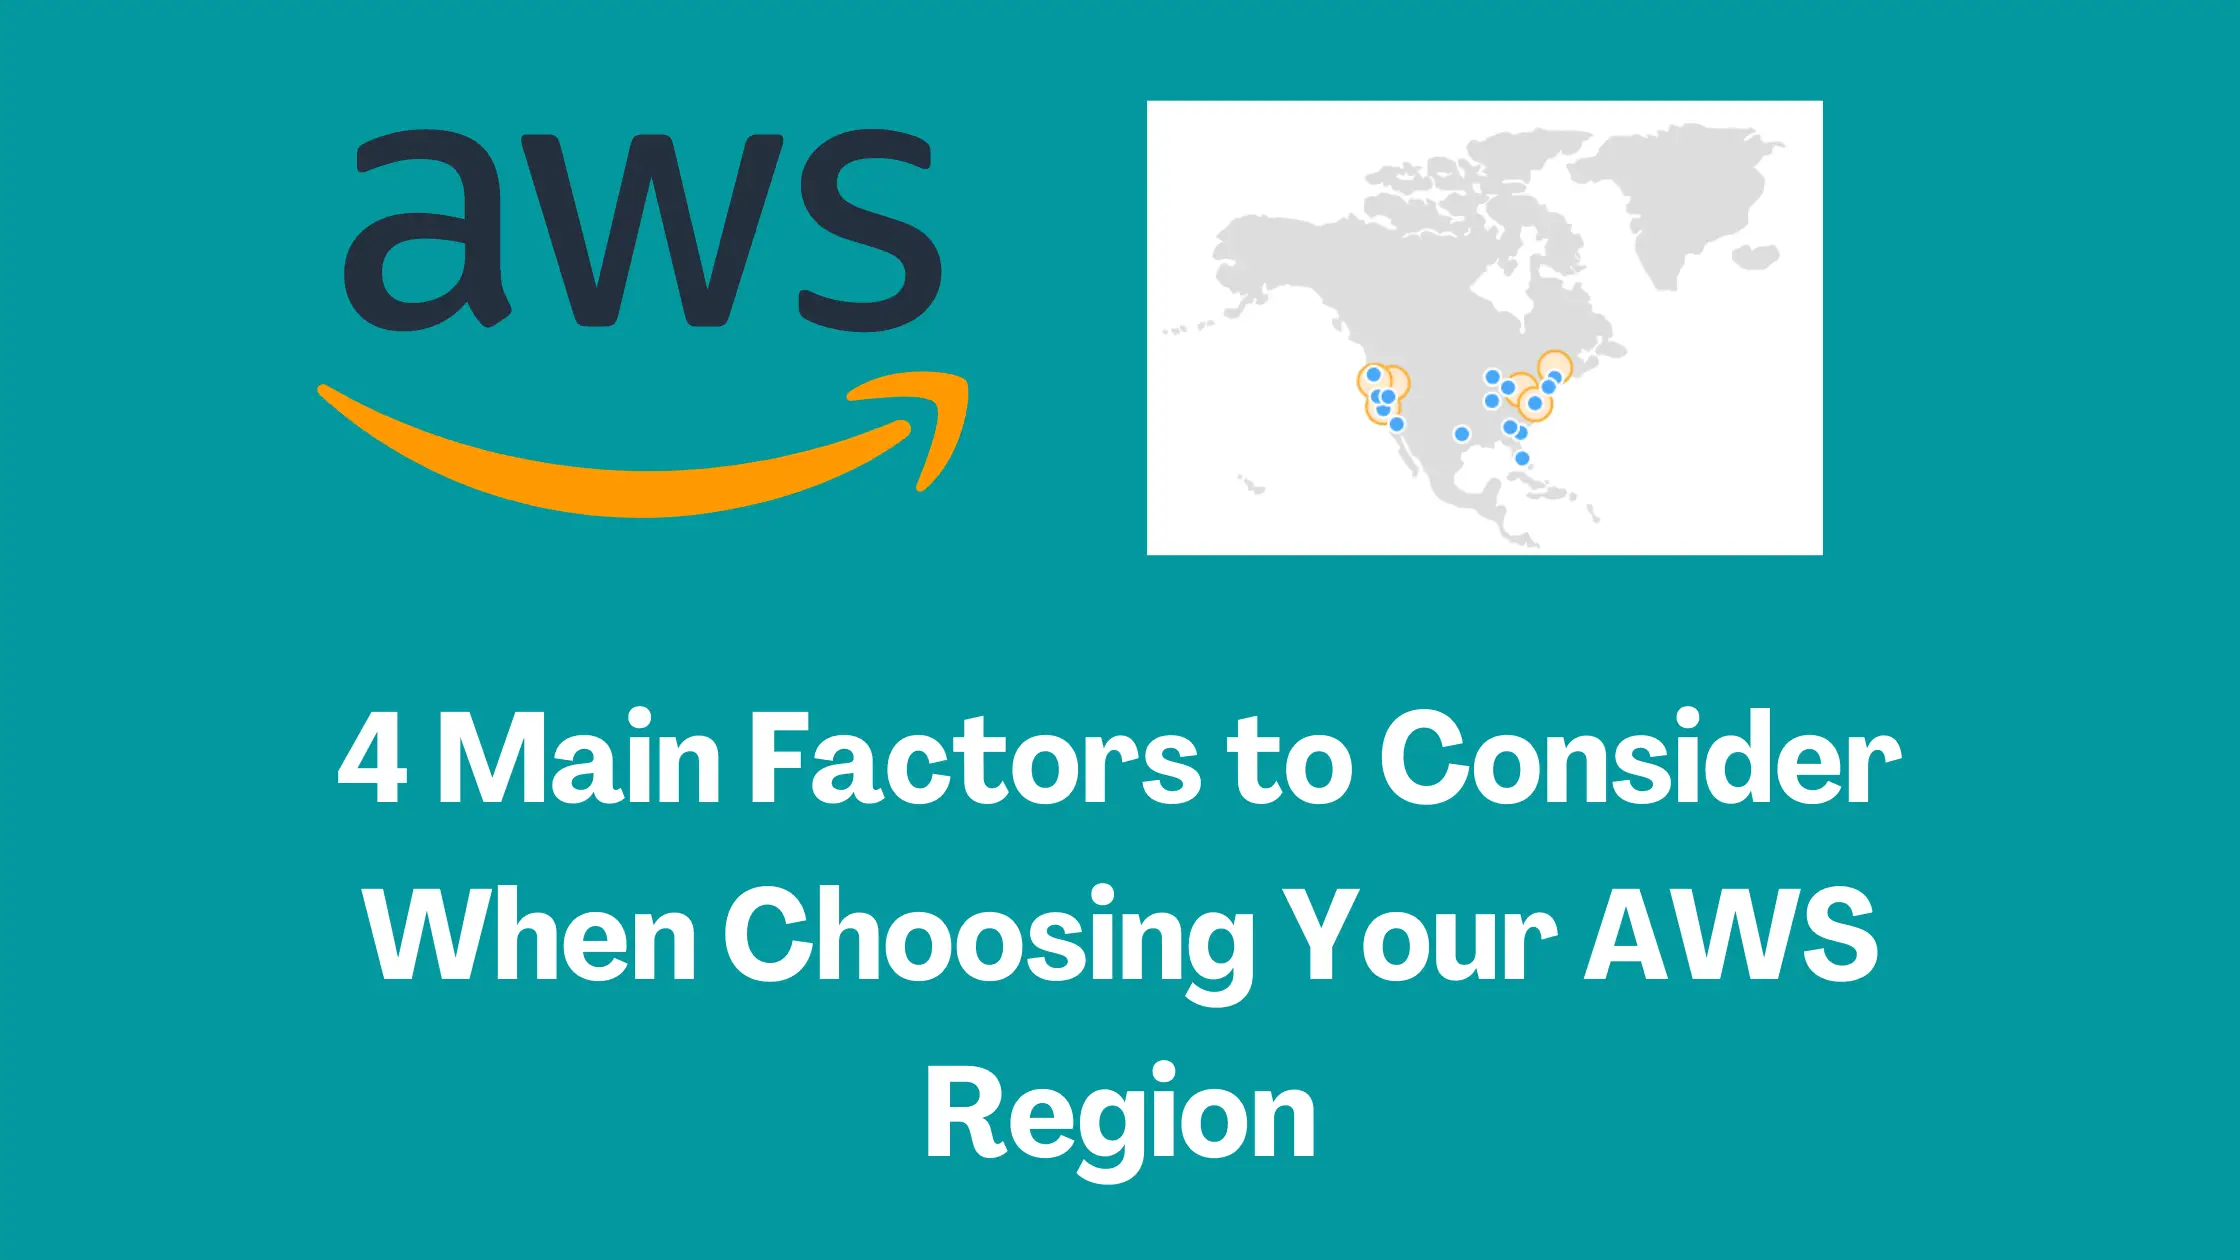 4 Main Factors to Consider When Choosing Your AWS Region